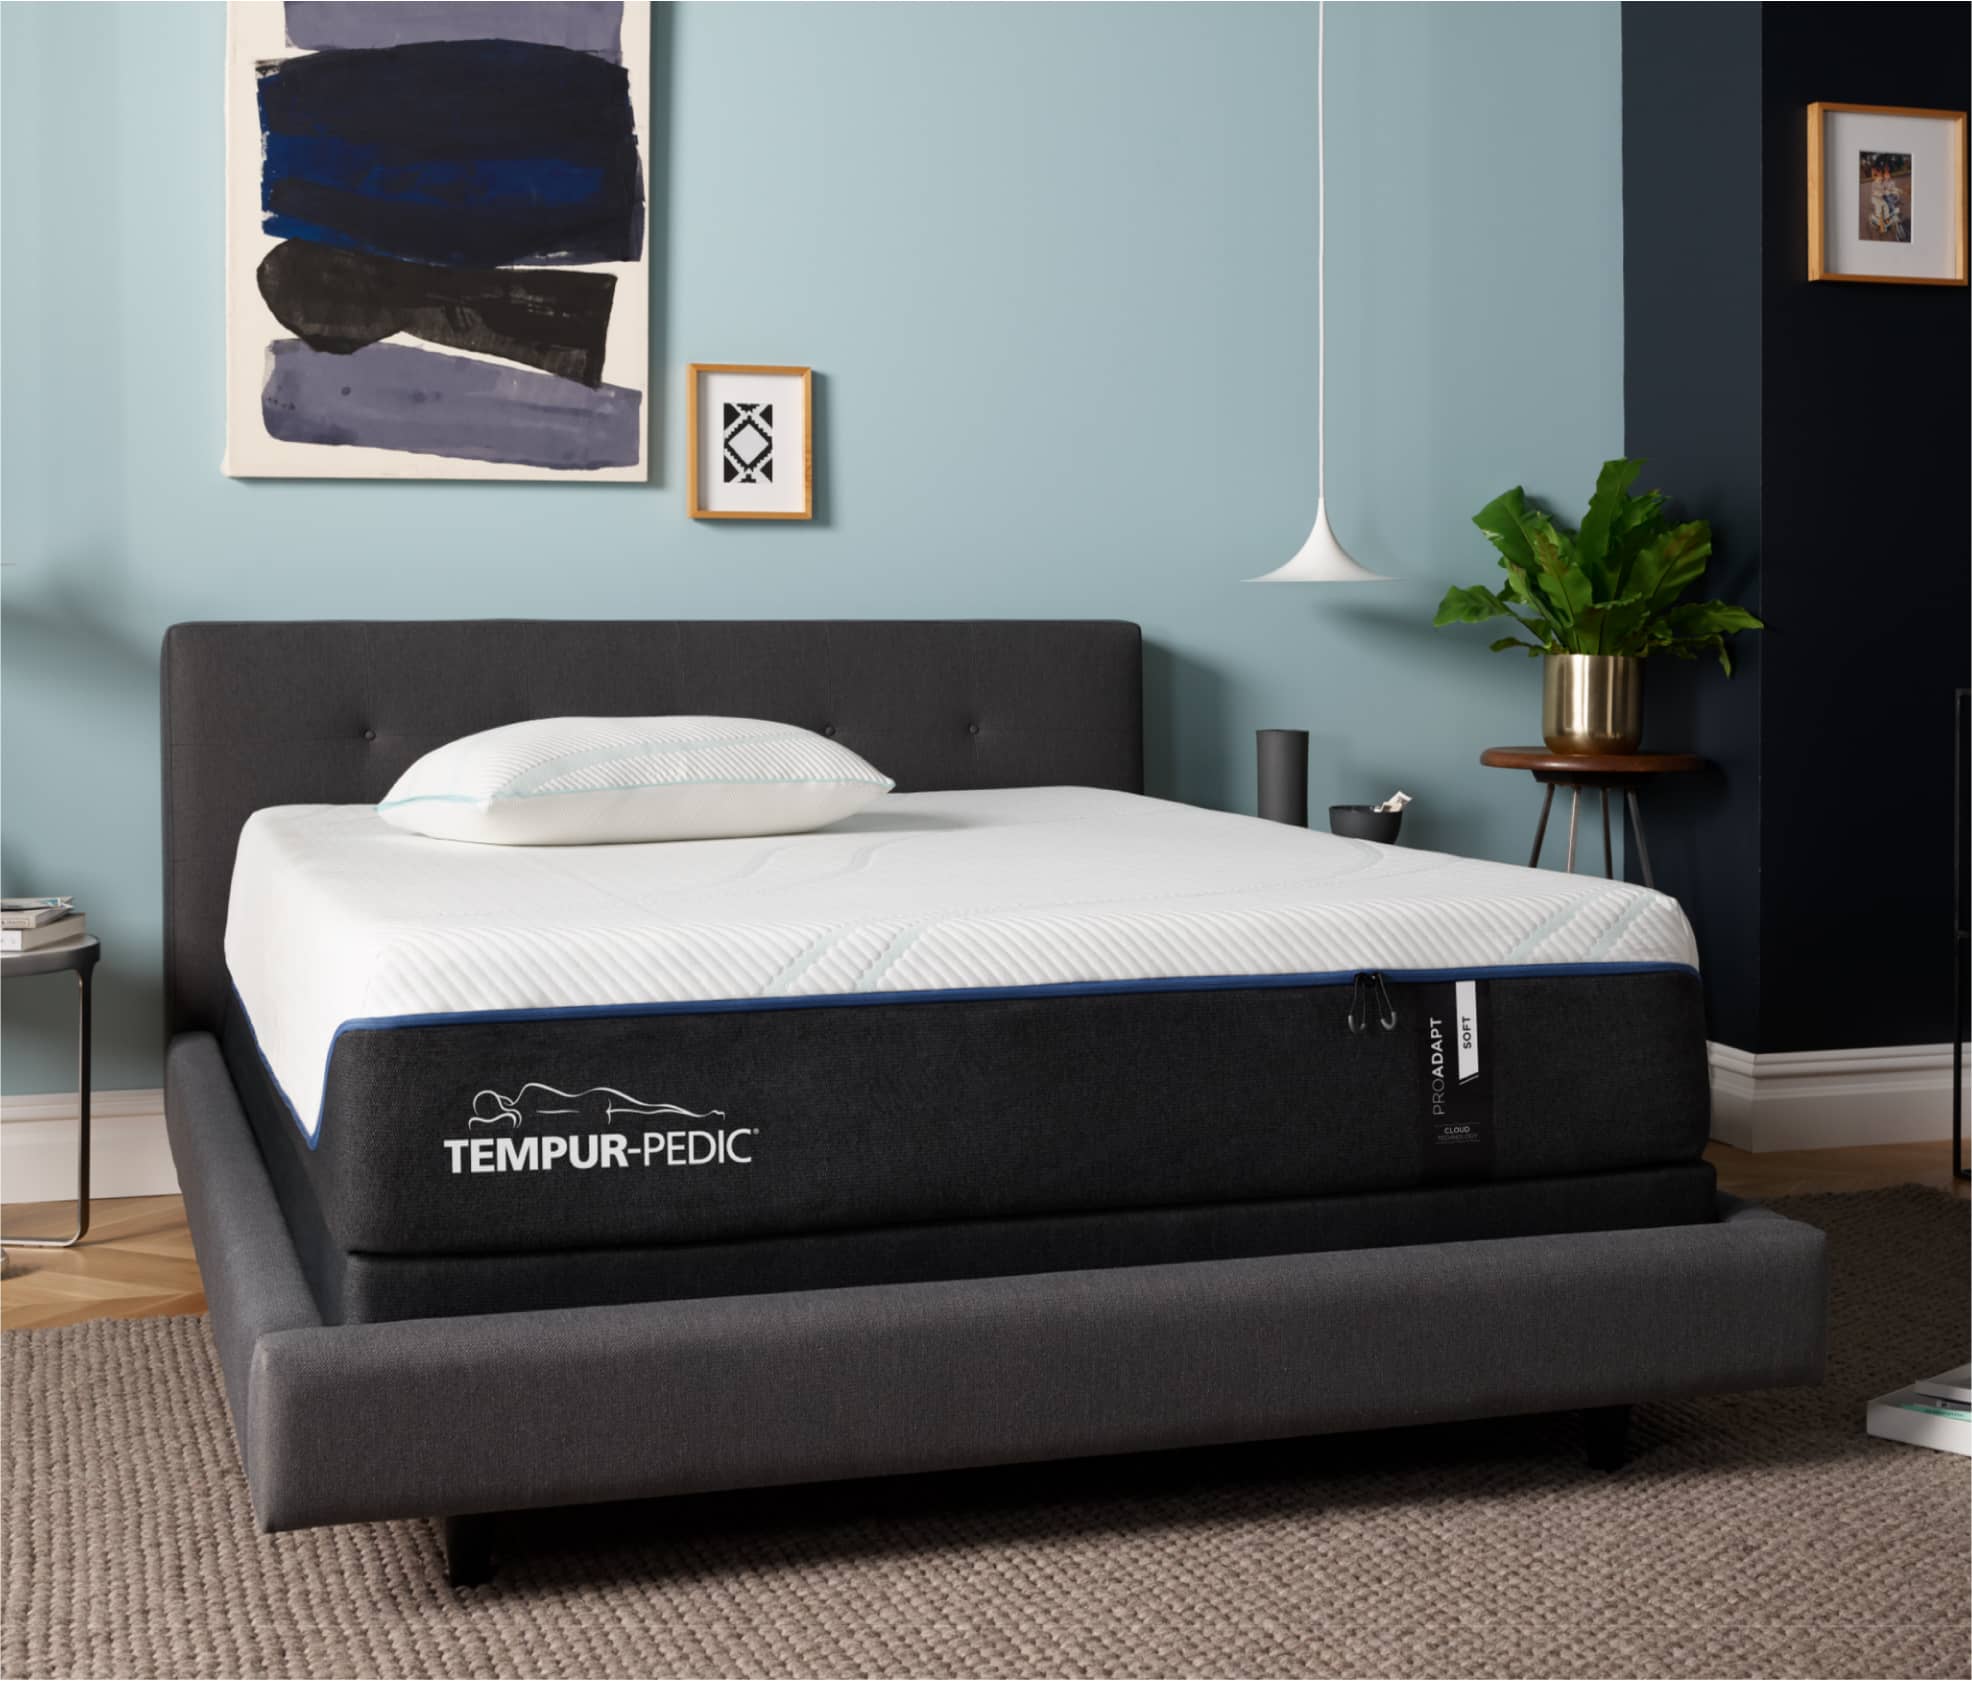 A Tempur-Pedic Mattress sits on top of a dark gray upholstered bedframe against a light blue wall. There is an abstract art of different shades of blue hung on the wall above it